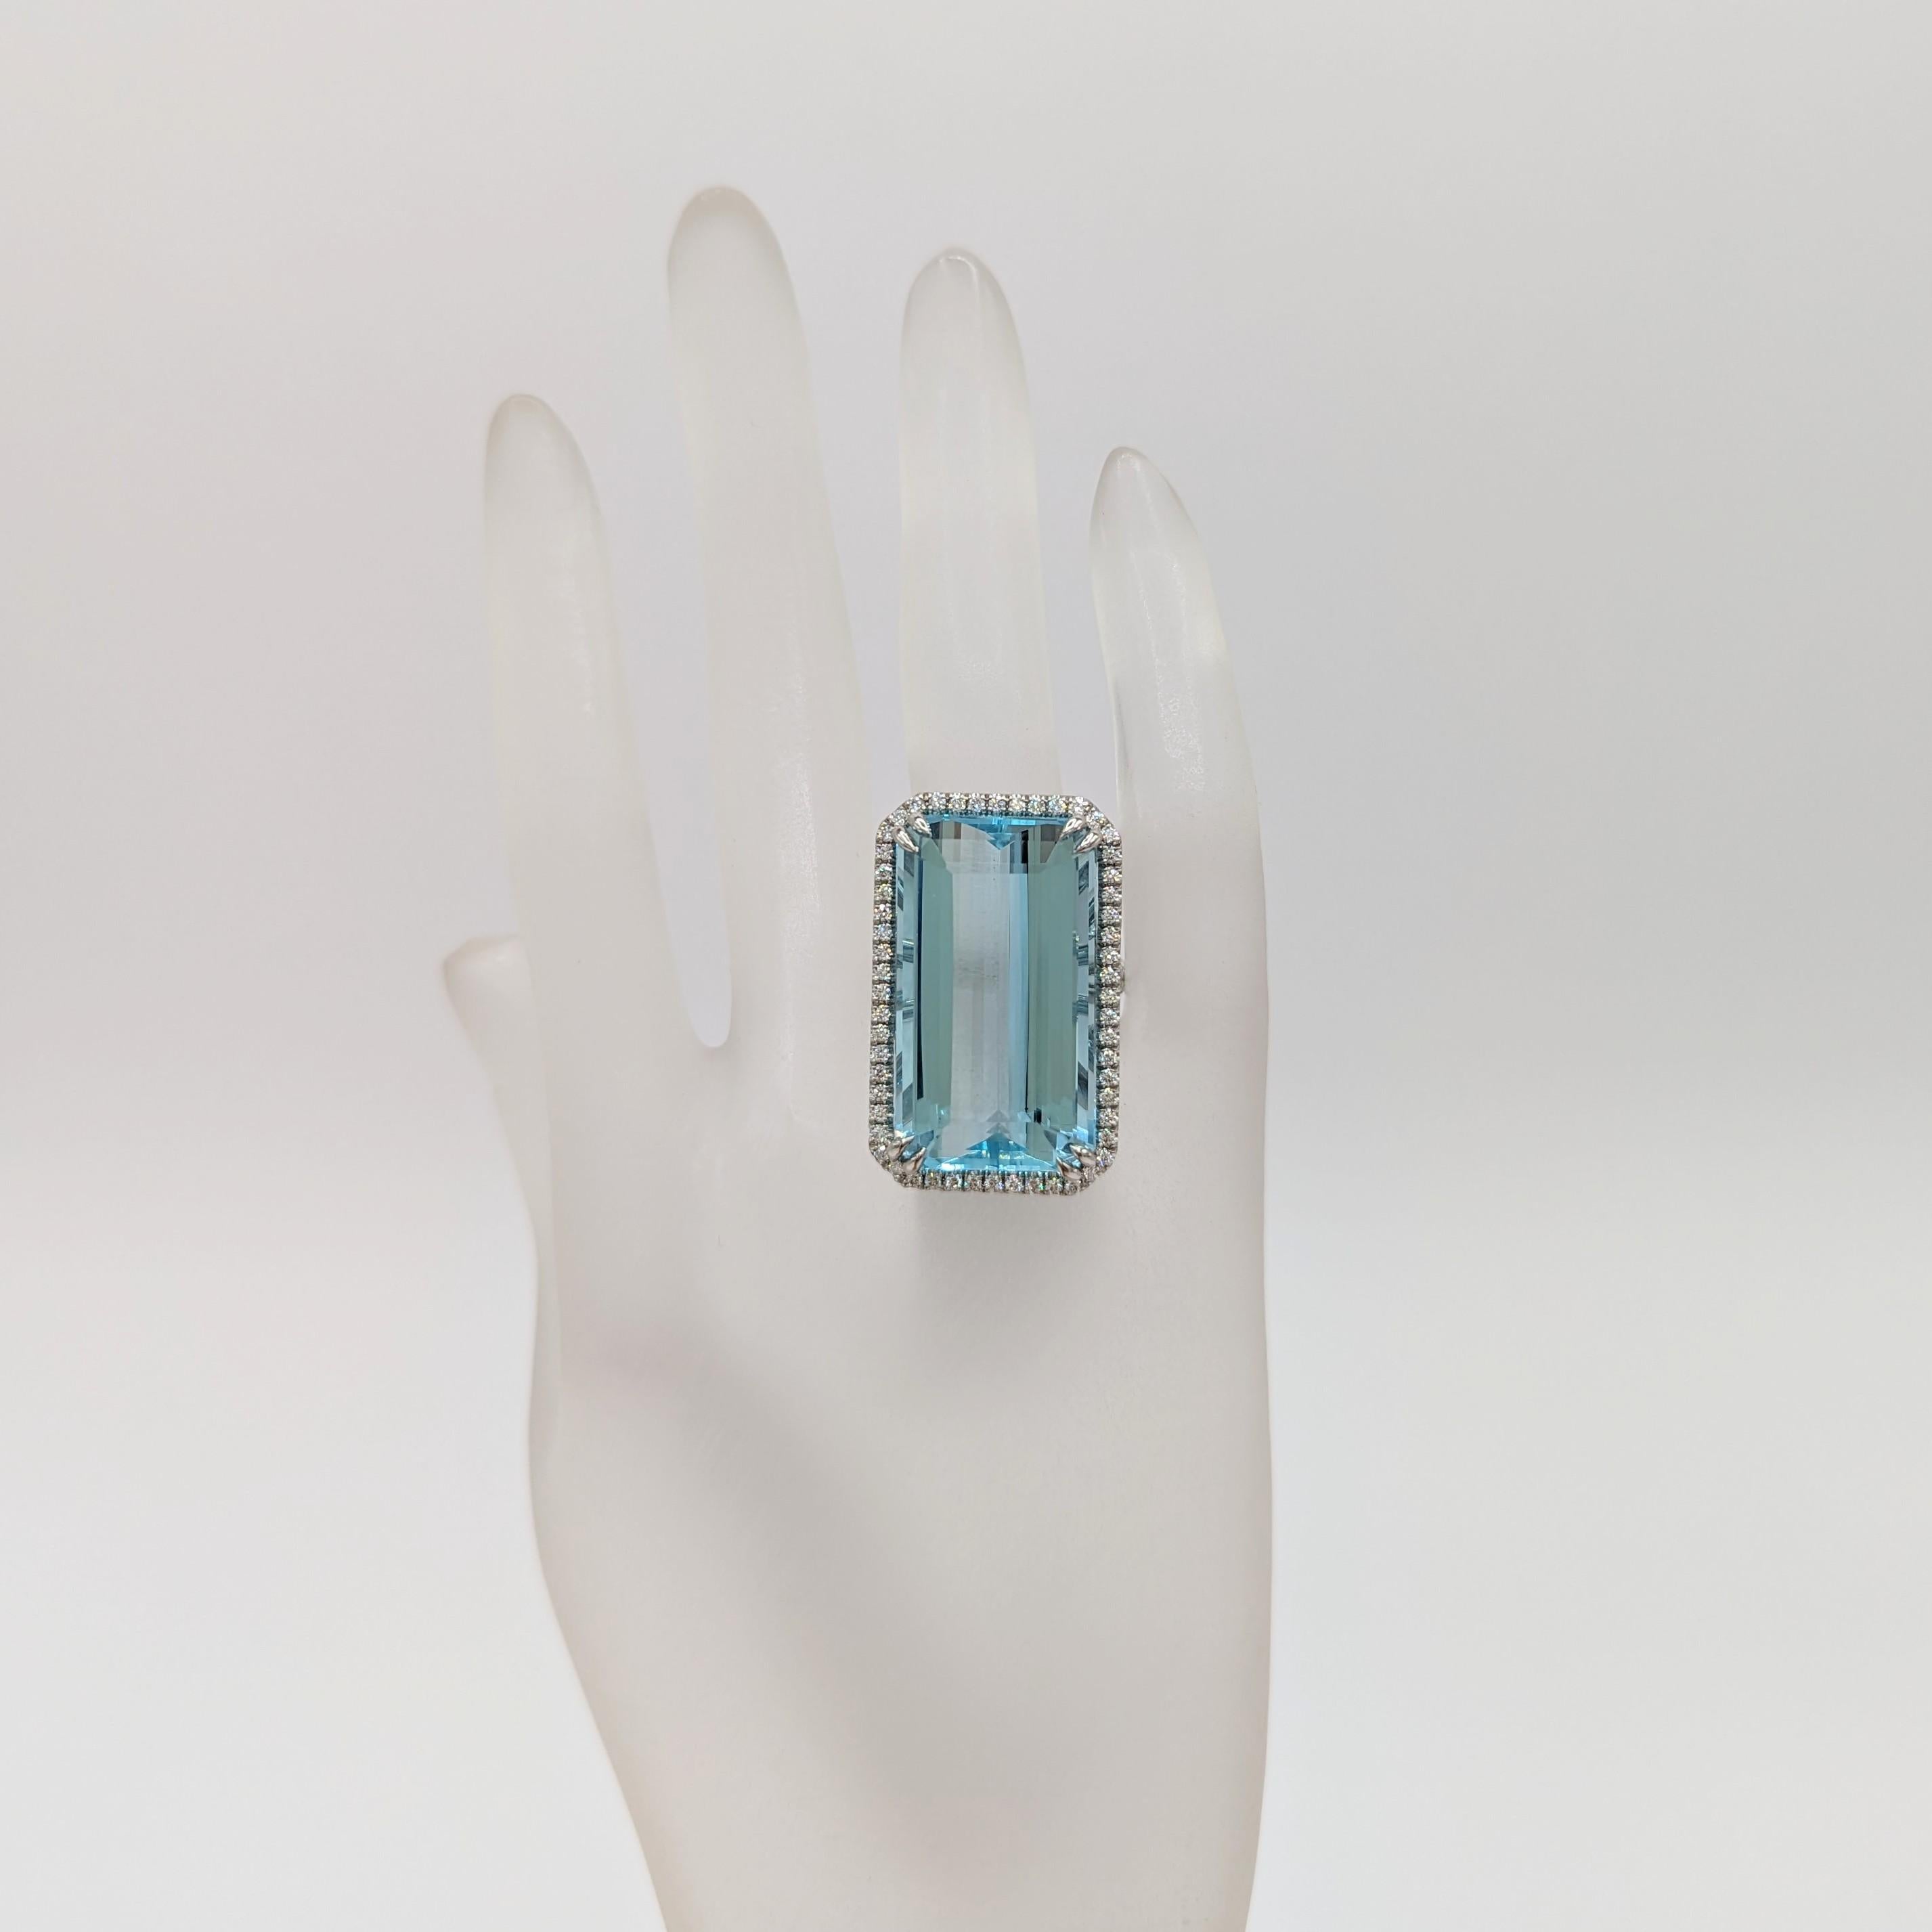 Gorgeous 34.88 ct. aquamarine emerald cut with 1.02 ct. good quality white diamond rounds.  Handmade in platinum.  Ring size 6.5.